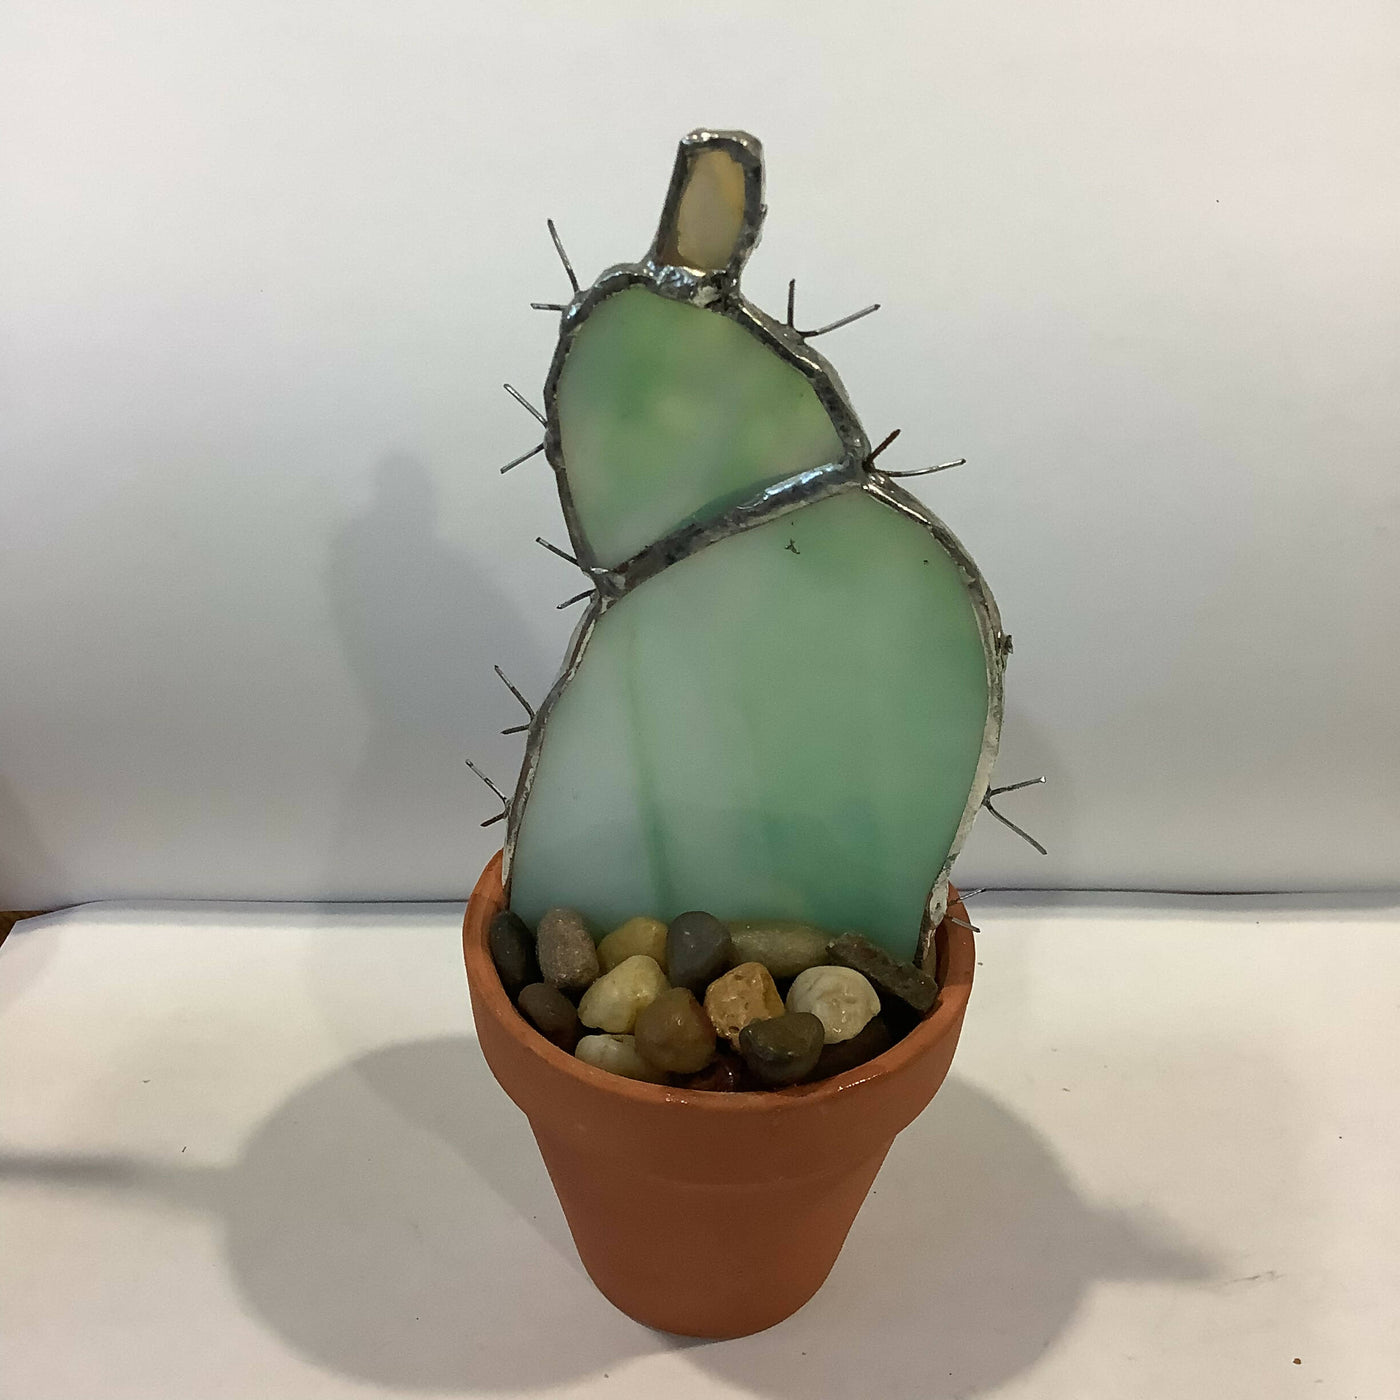 Stained Glass Cactus